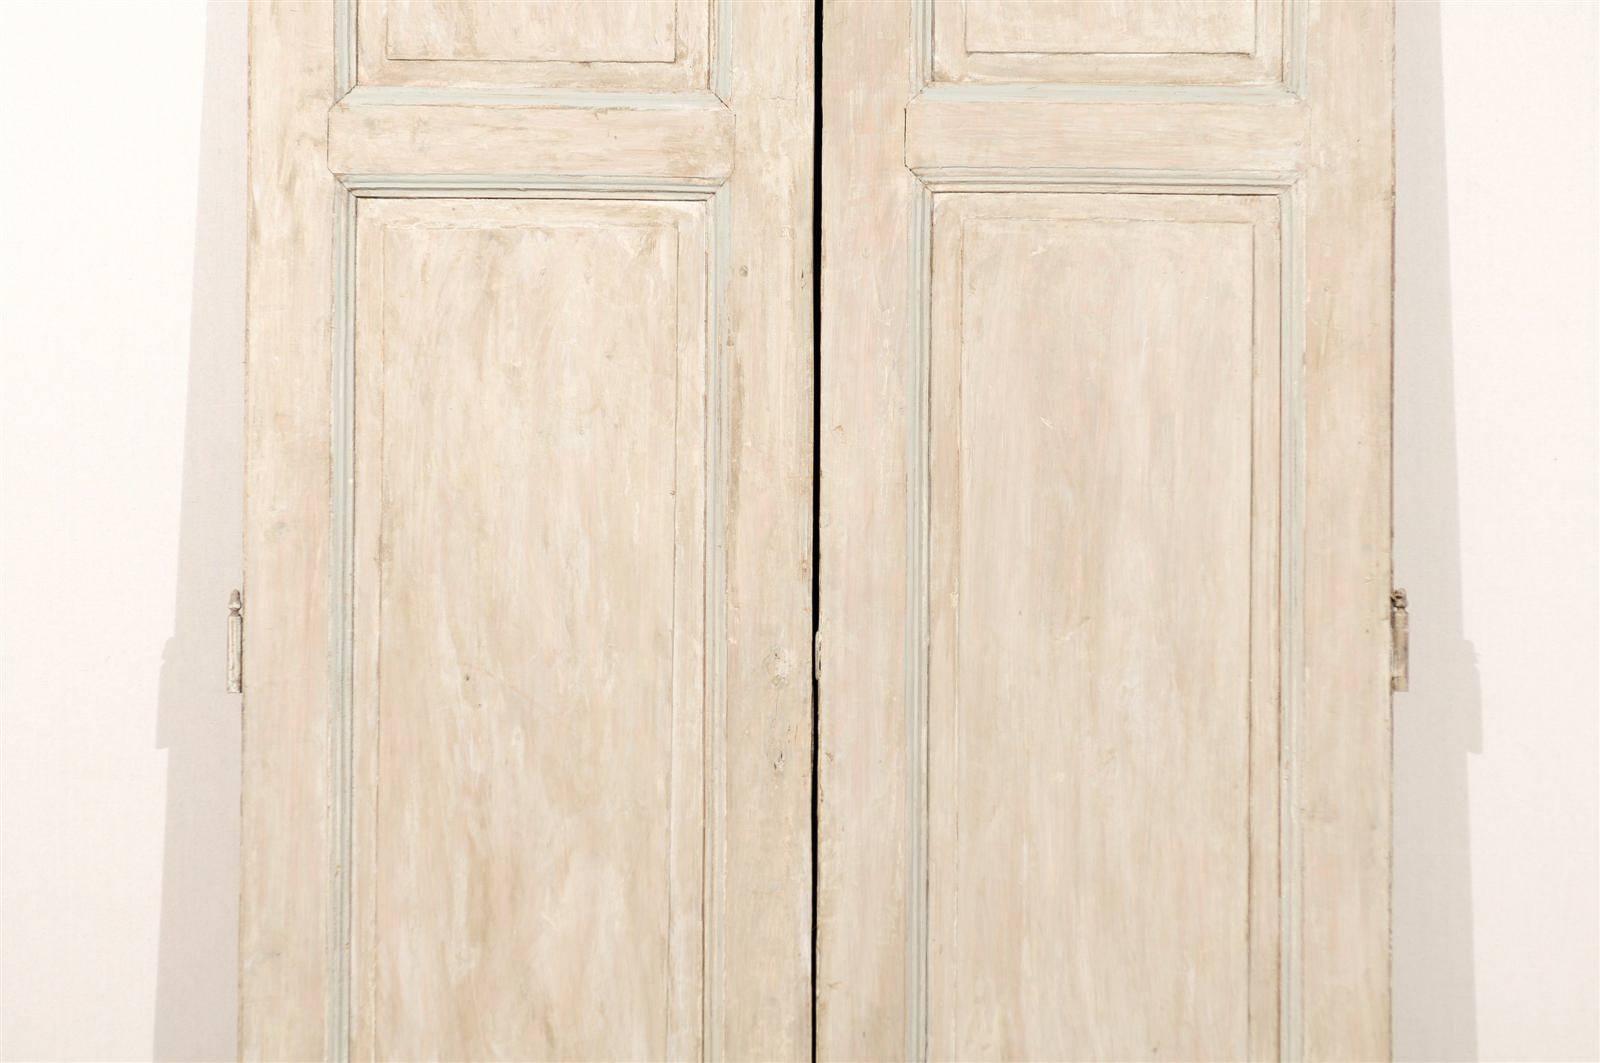 Wood Pair of Tall French Doors from the Mid-19th Century